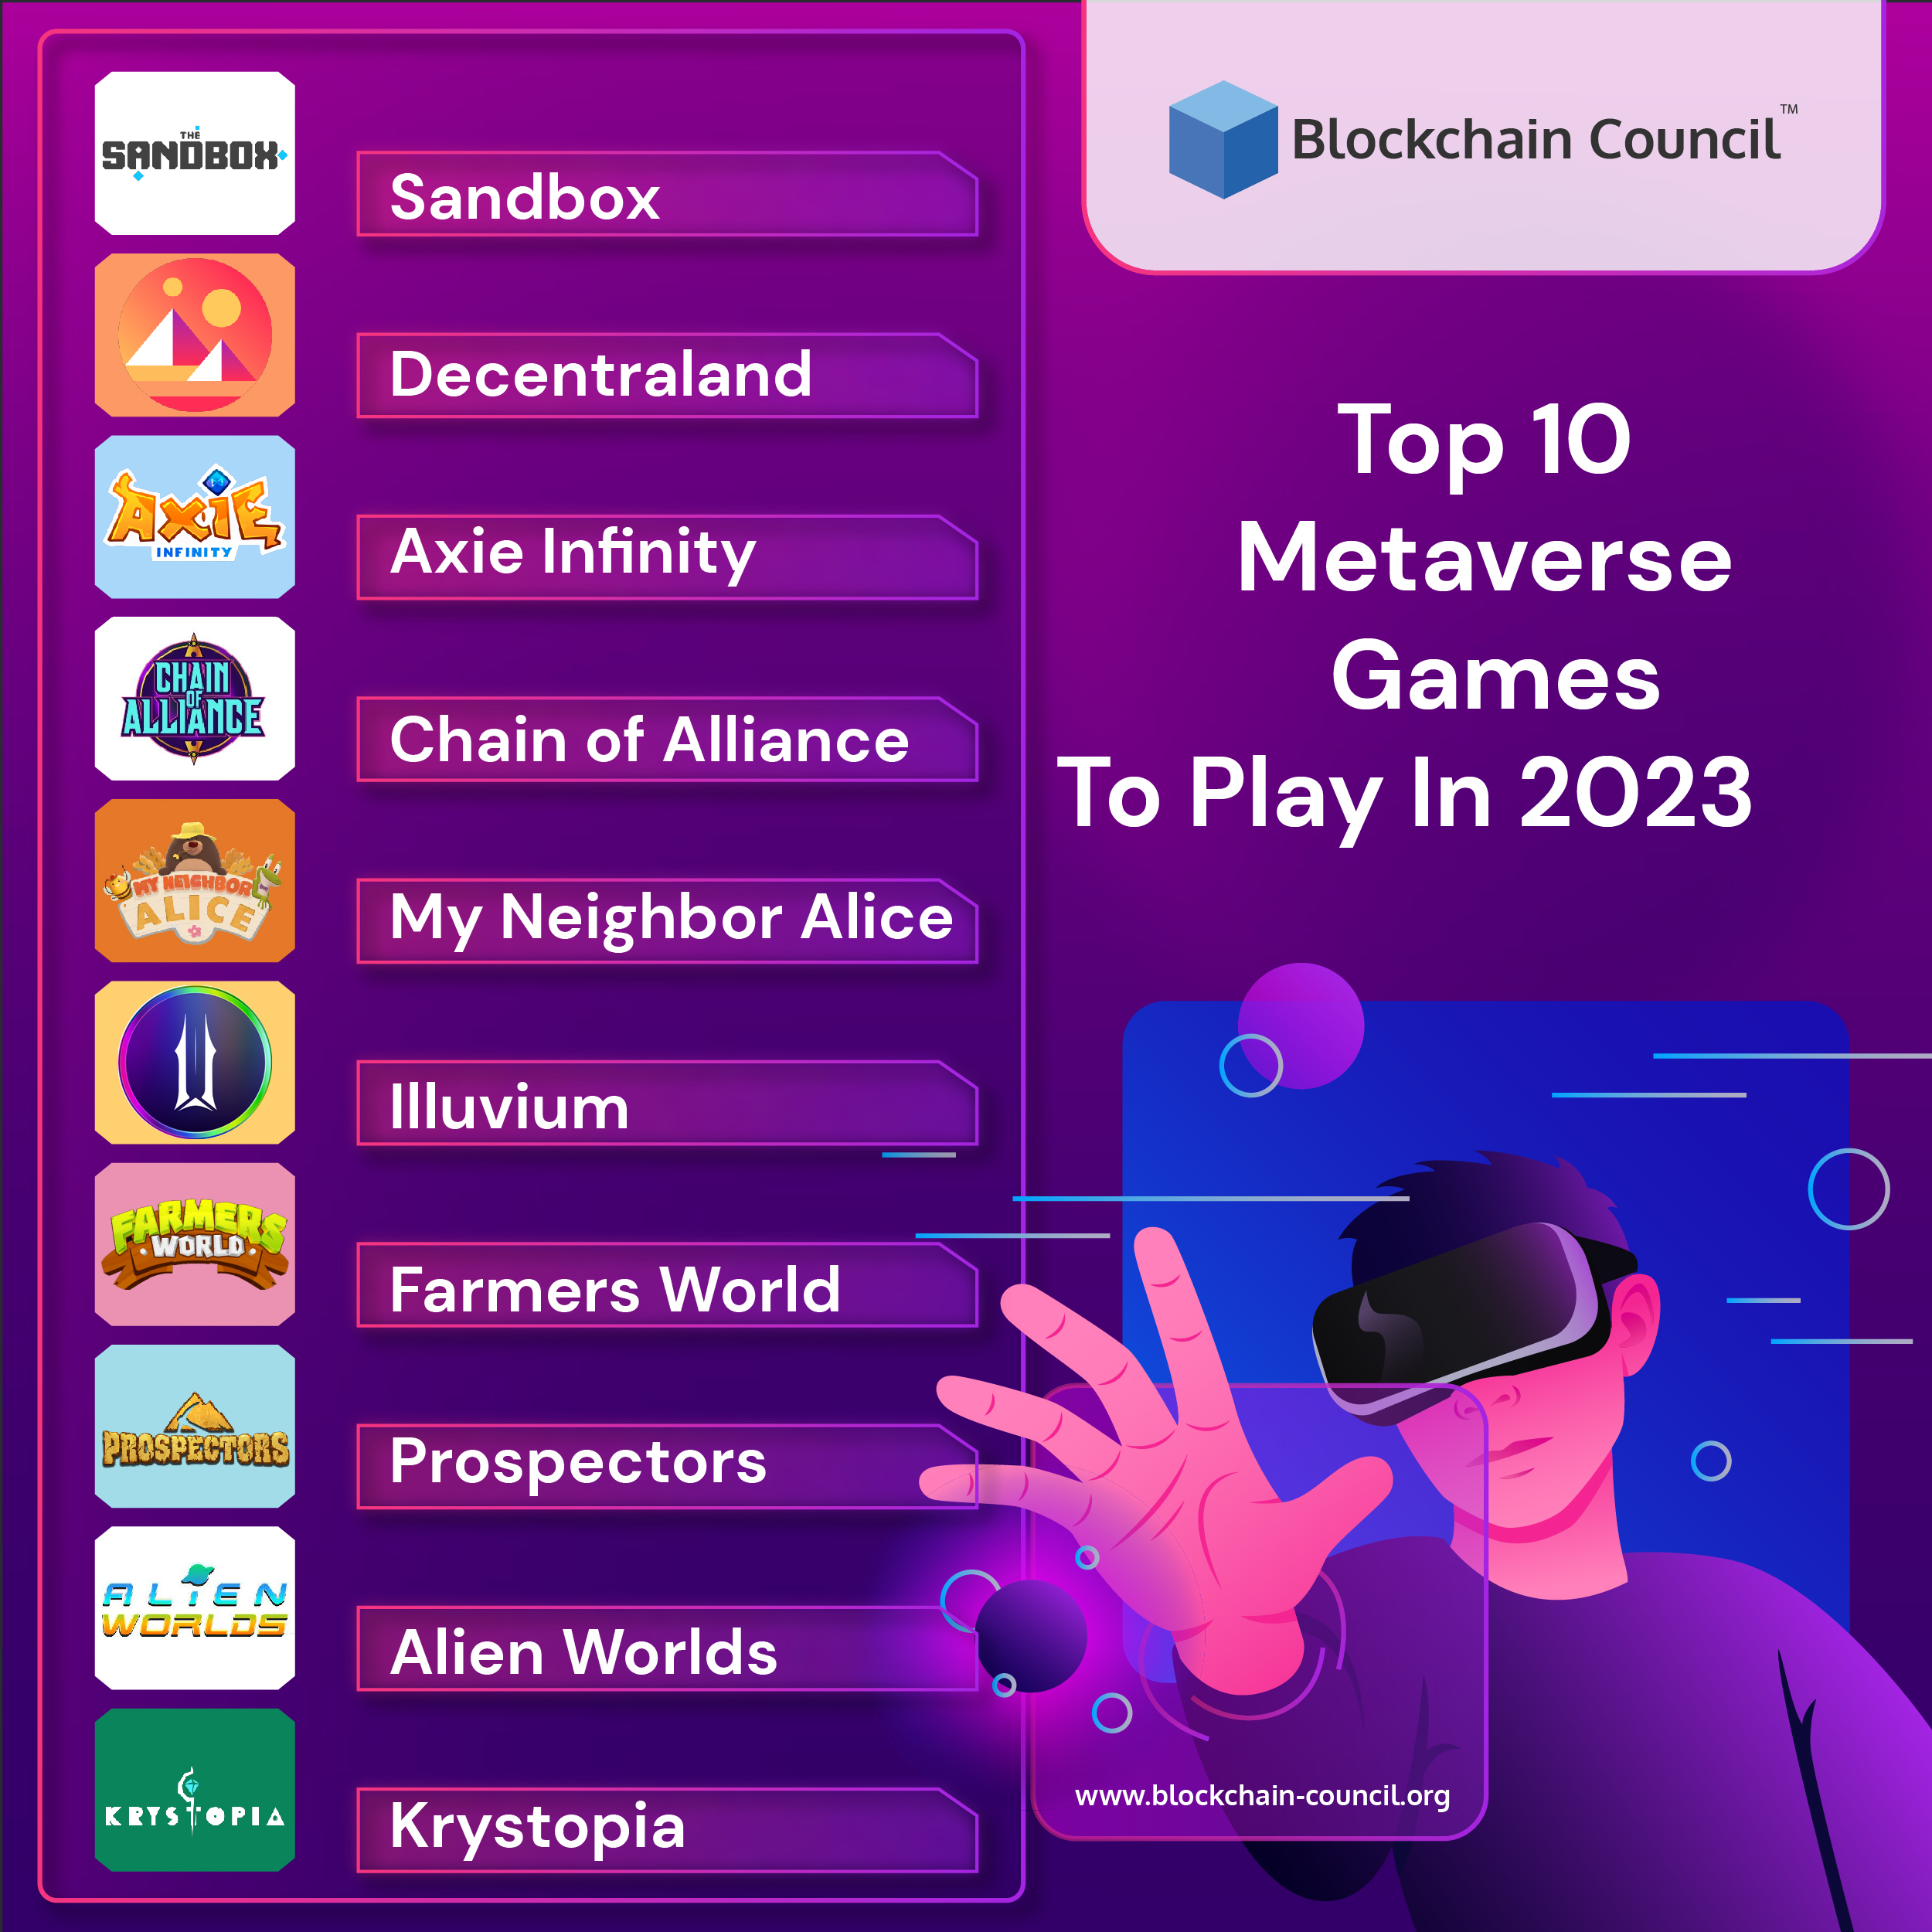 Top 10 Metaverse Games To Play In 2023